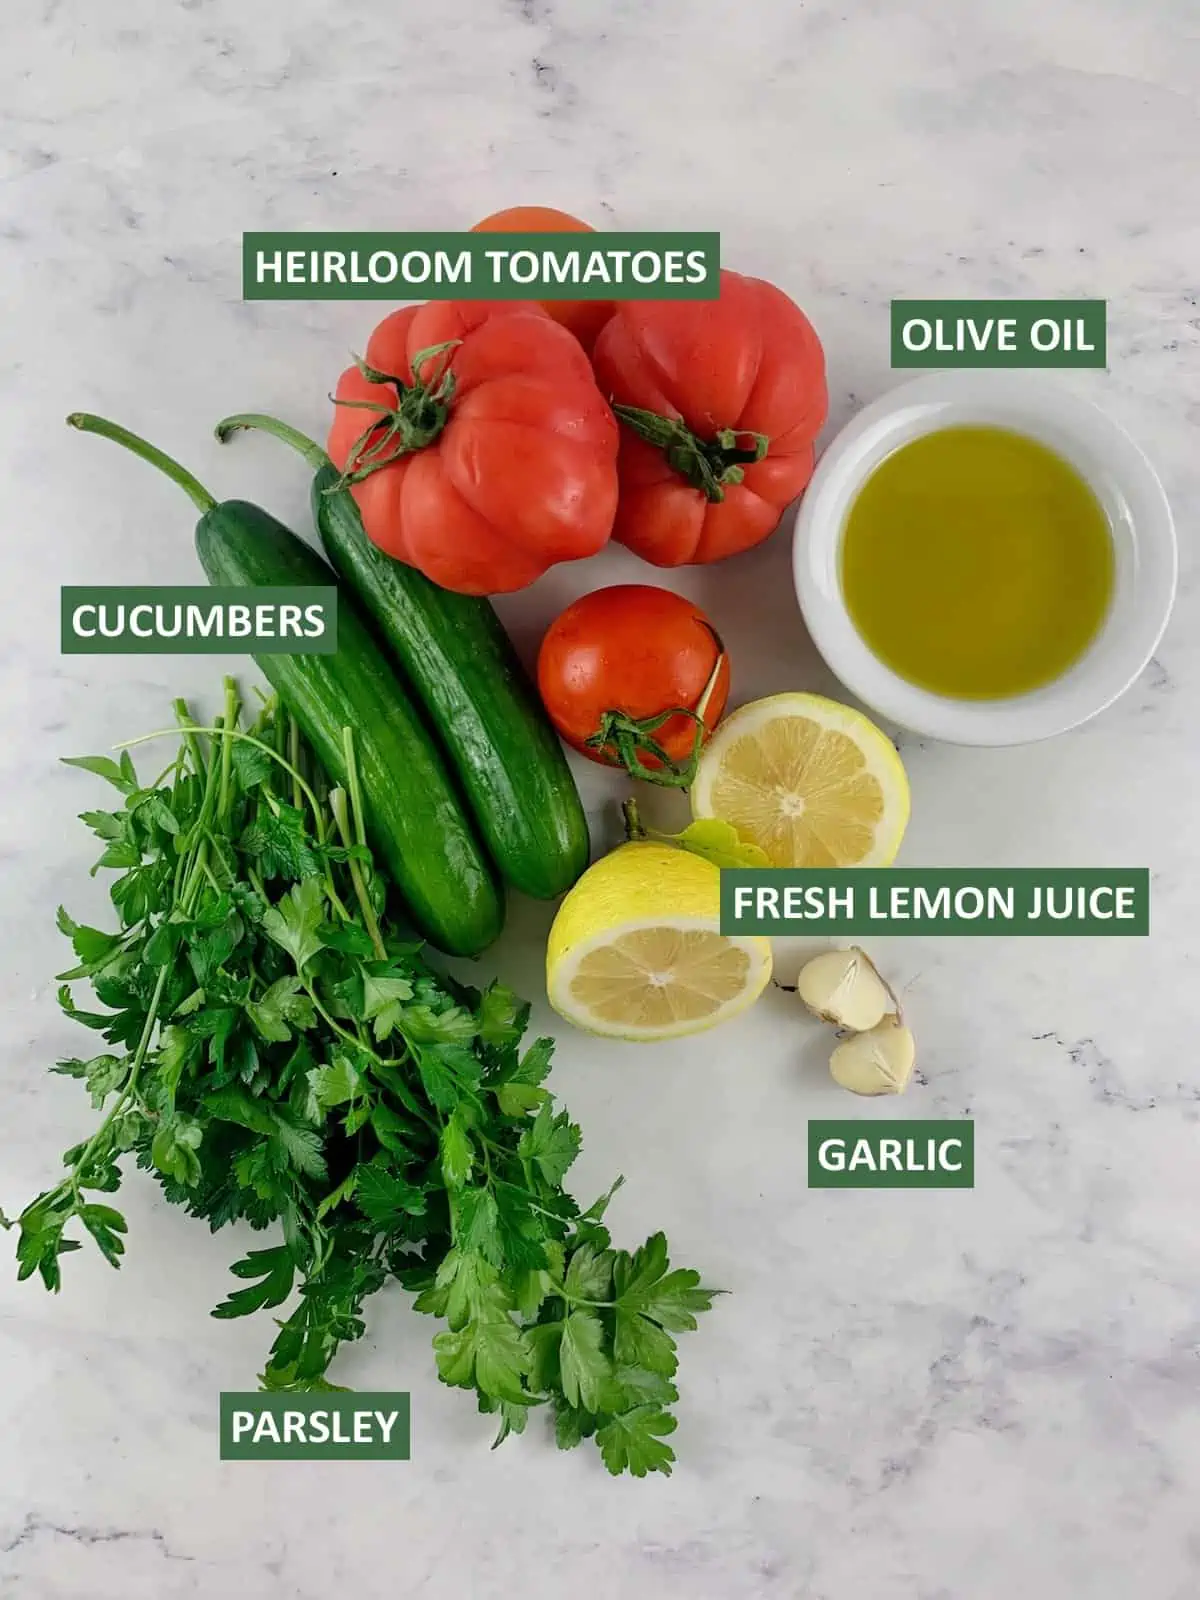 LABELLED INGREDIENTS TO MAKE MEDITERRANEAN TOMATO AND CUCUMBER SALAD I